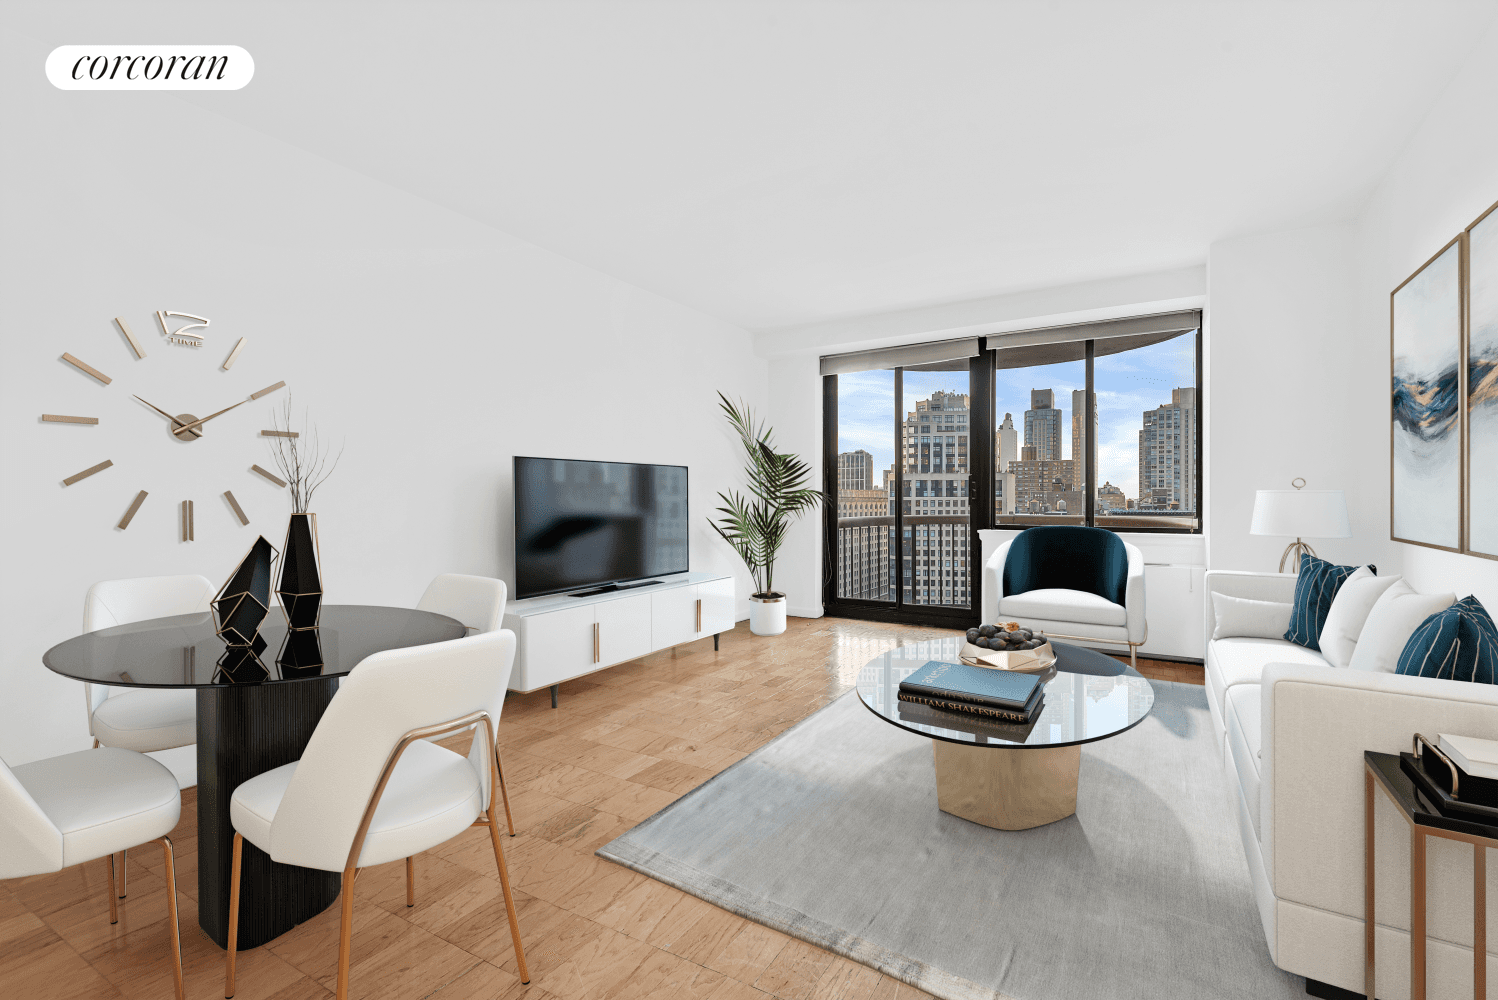 OPEN PARK AND SKYLINE VIEWS at 45 East 25th Street in Flatiron !